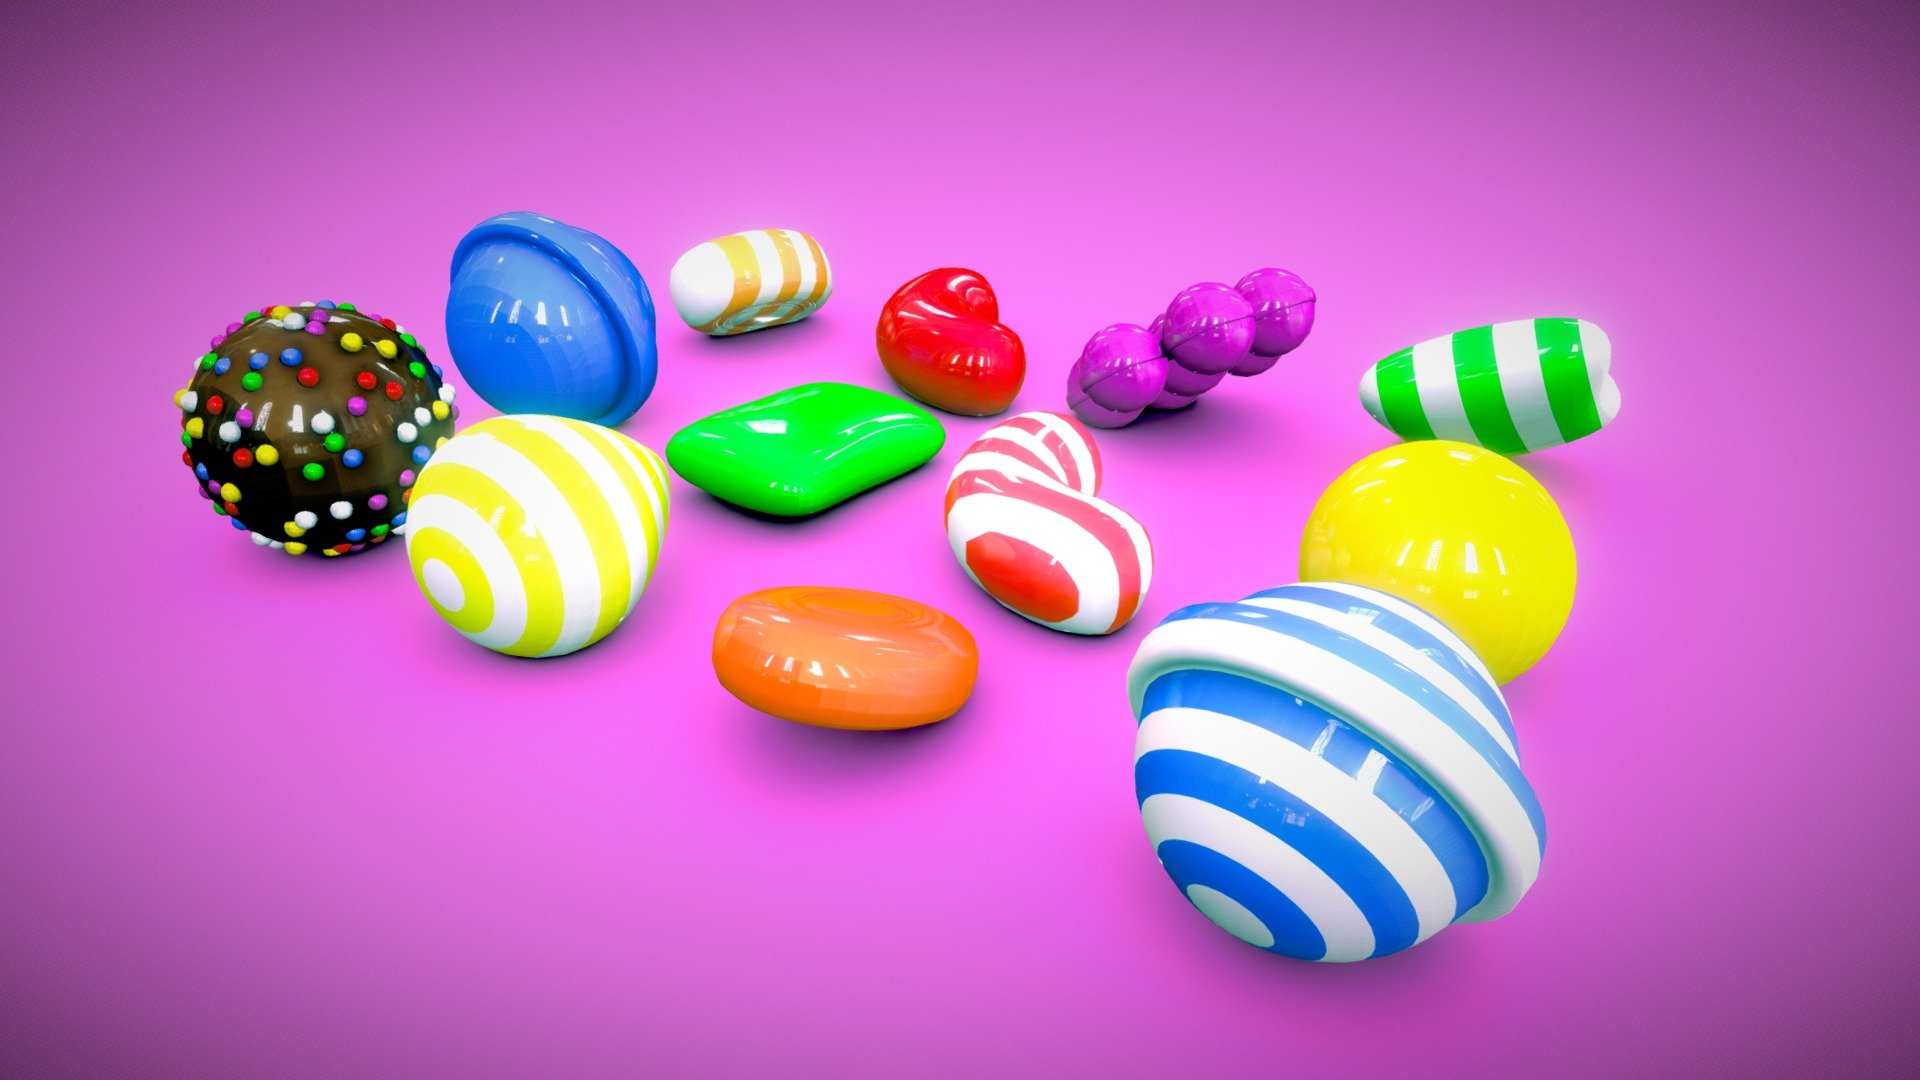 Day10 Candy Buy Royalty Free 3d Model By Binrong C4e931e